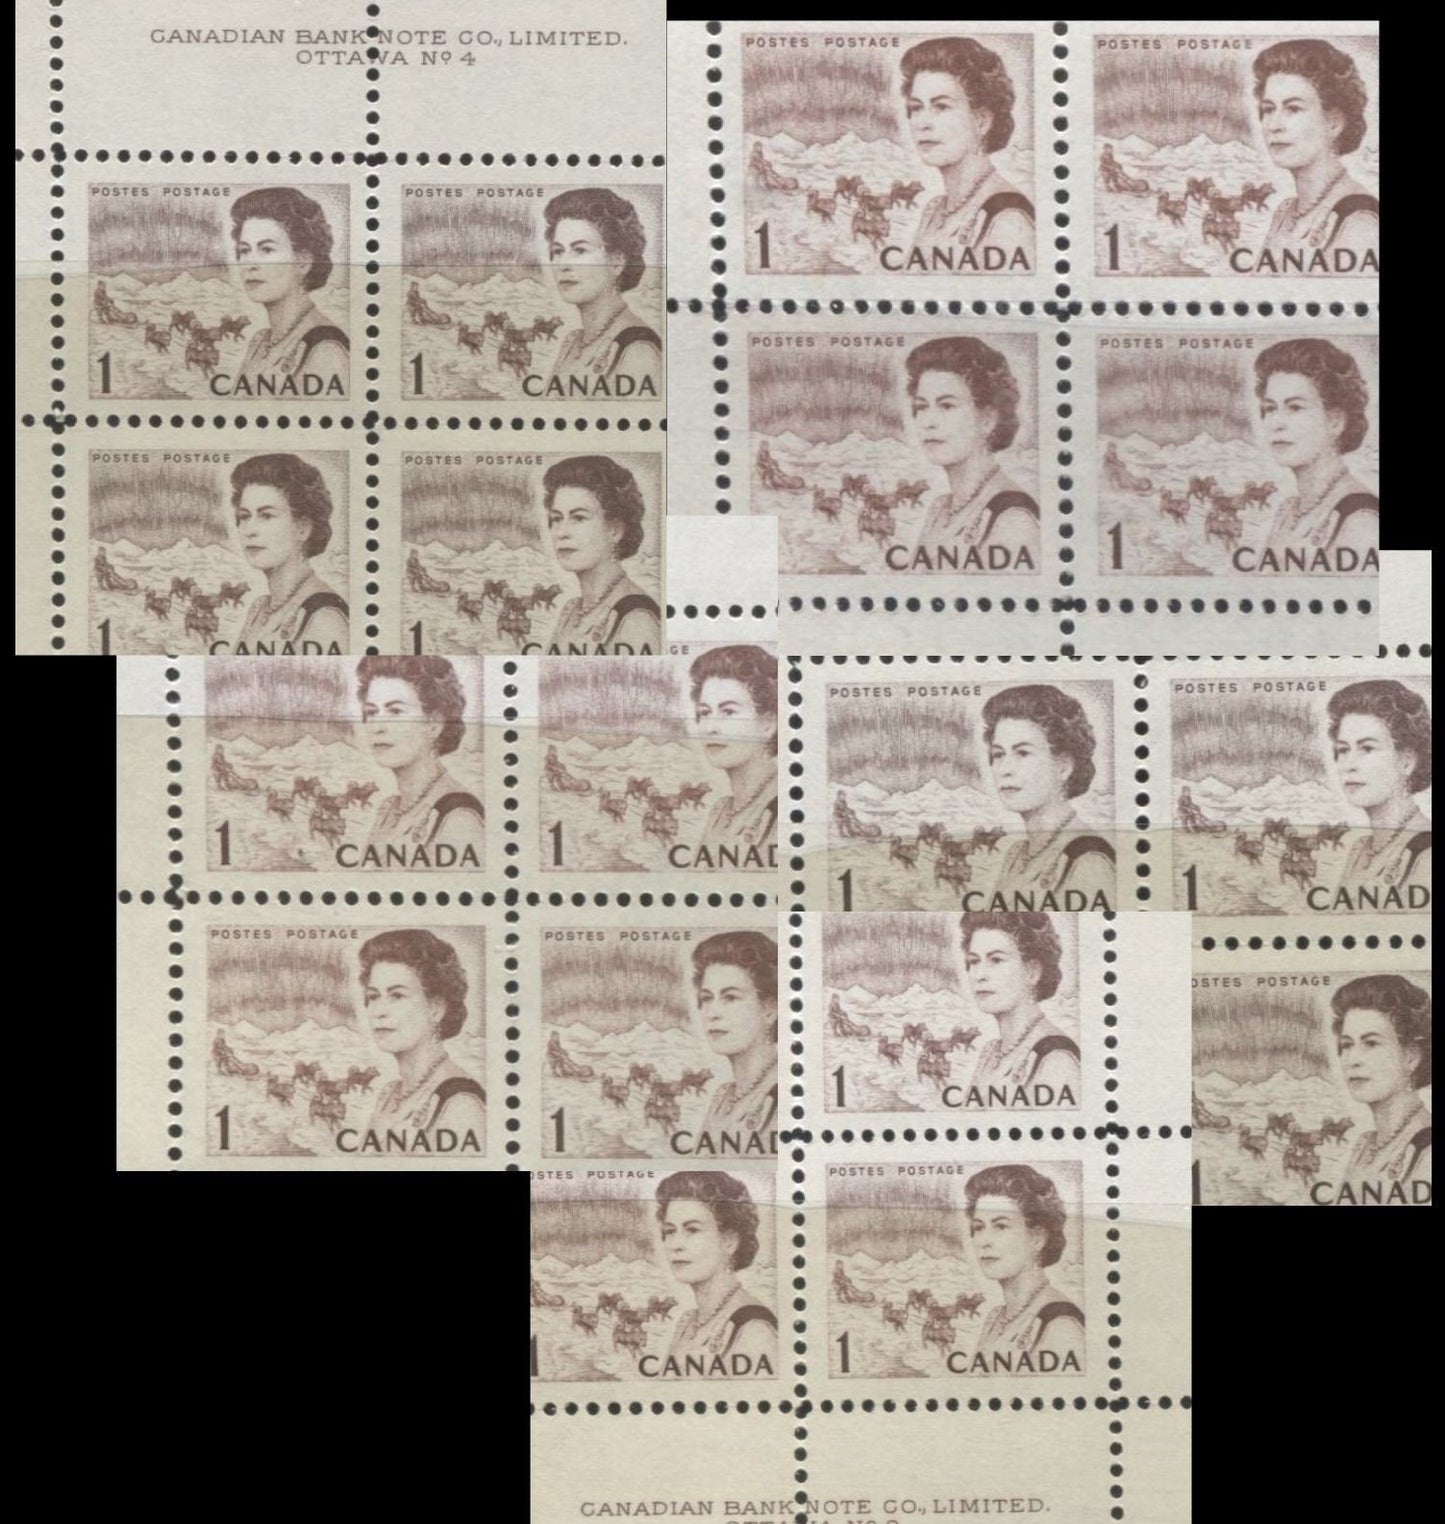 Lot #108 Canada #454 1c Brown & Violet Brown, Northern Lights and Dogsled Team, 1967-1973 Centennial Issue, A Specialized Lot of Plate 3 UL Blocks on DF and DF-fl Papers